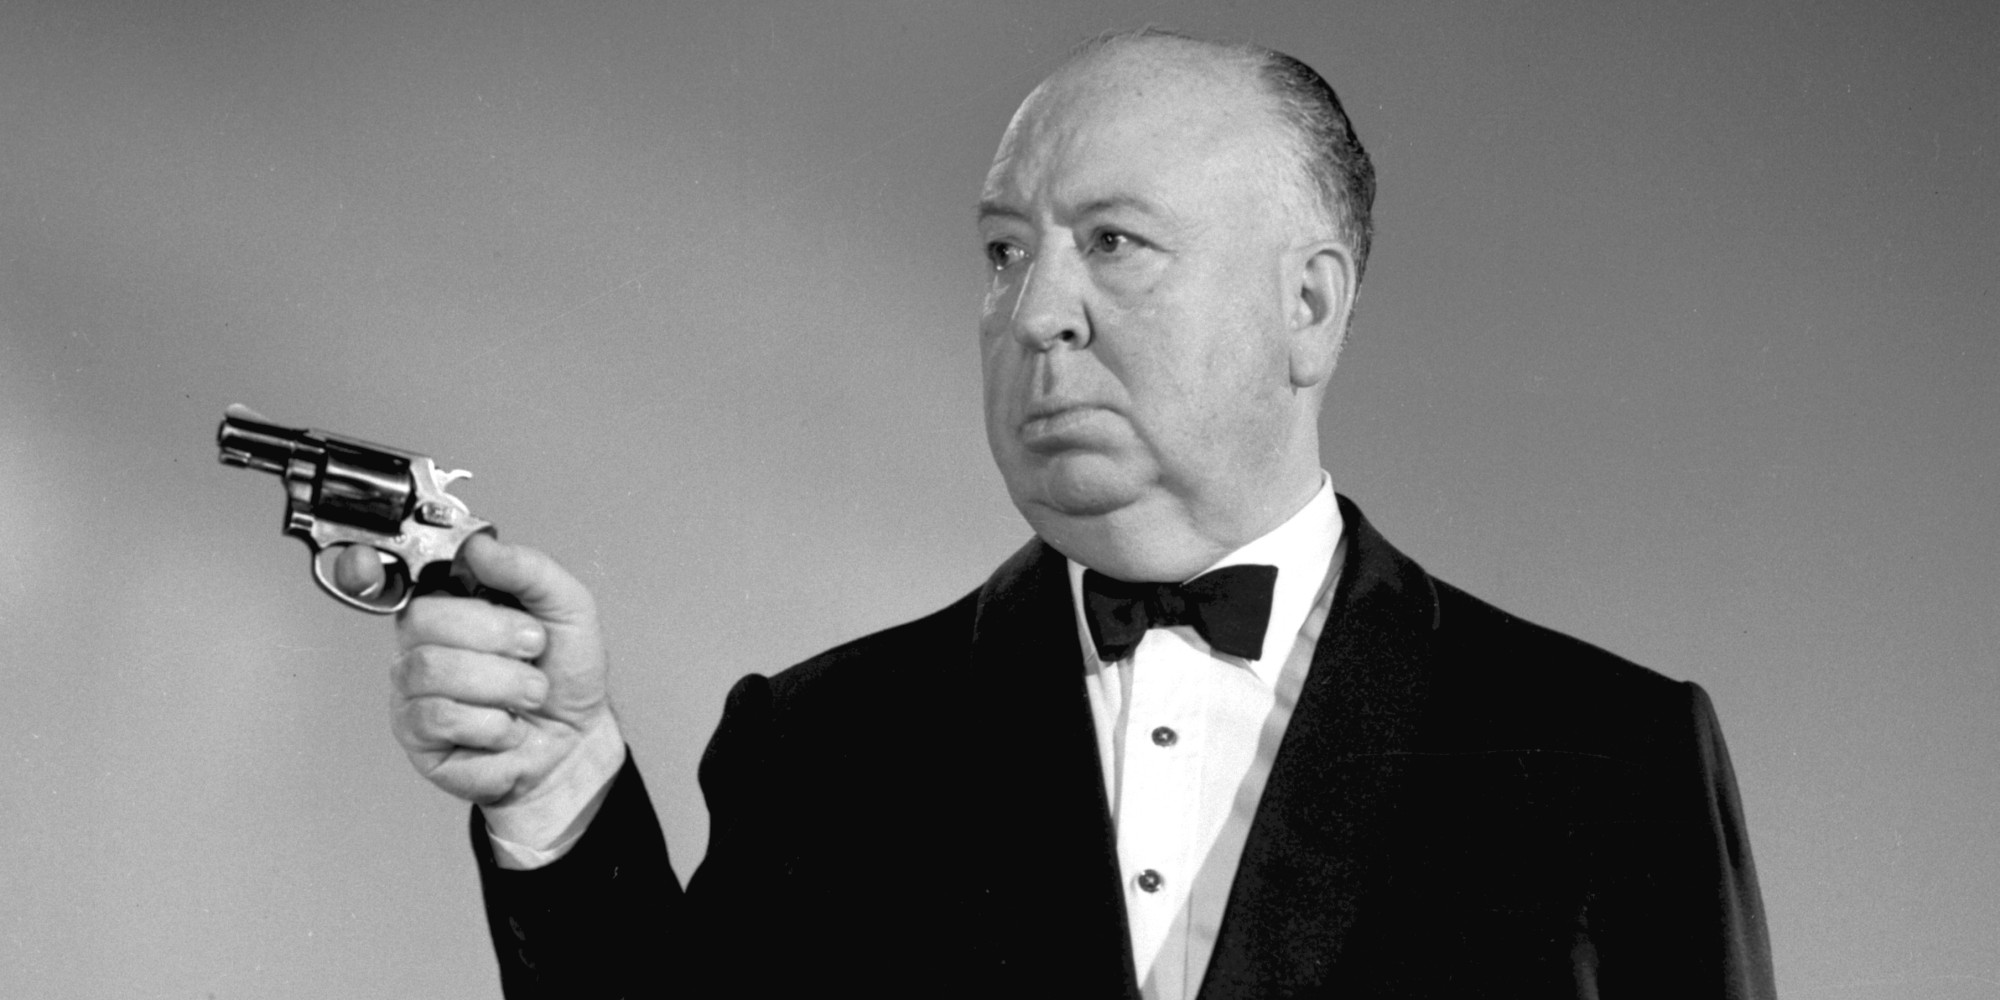 Promotional portrait of British-born American film and television director Alfred Hitchcock (1899 - 1980), dressed in a tuxedo, as he aims a revolver for his anthology program 'The Alfred Hitchcock Hour,' December 12, 1962. (Photo by CBS Photo Archive/Getty Images)